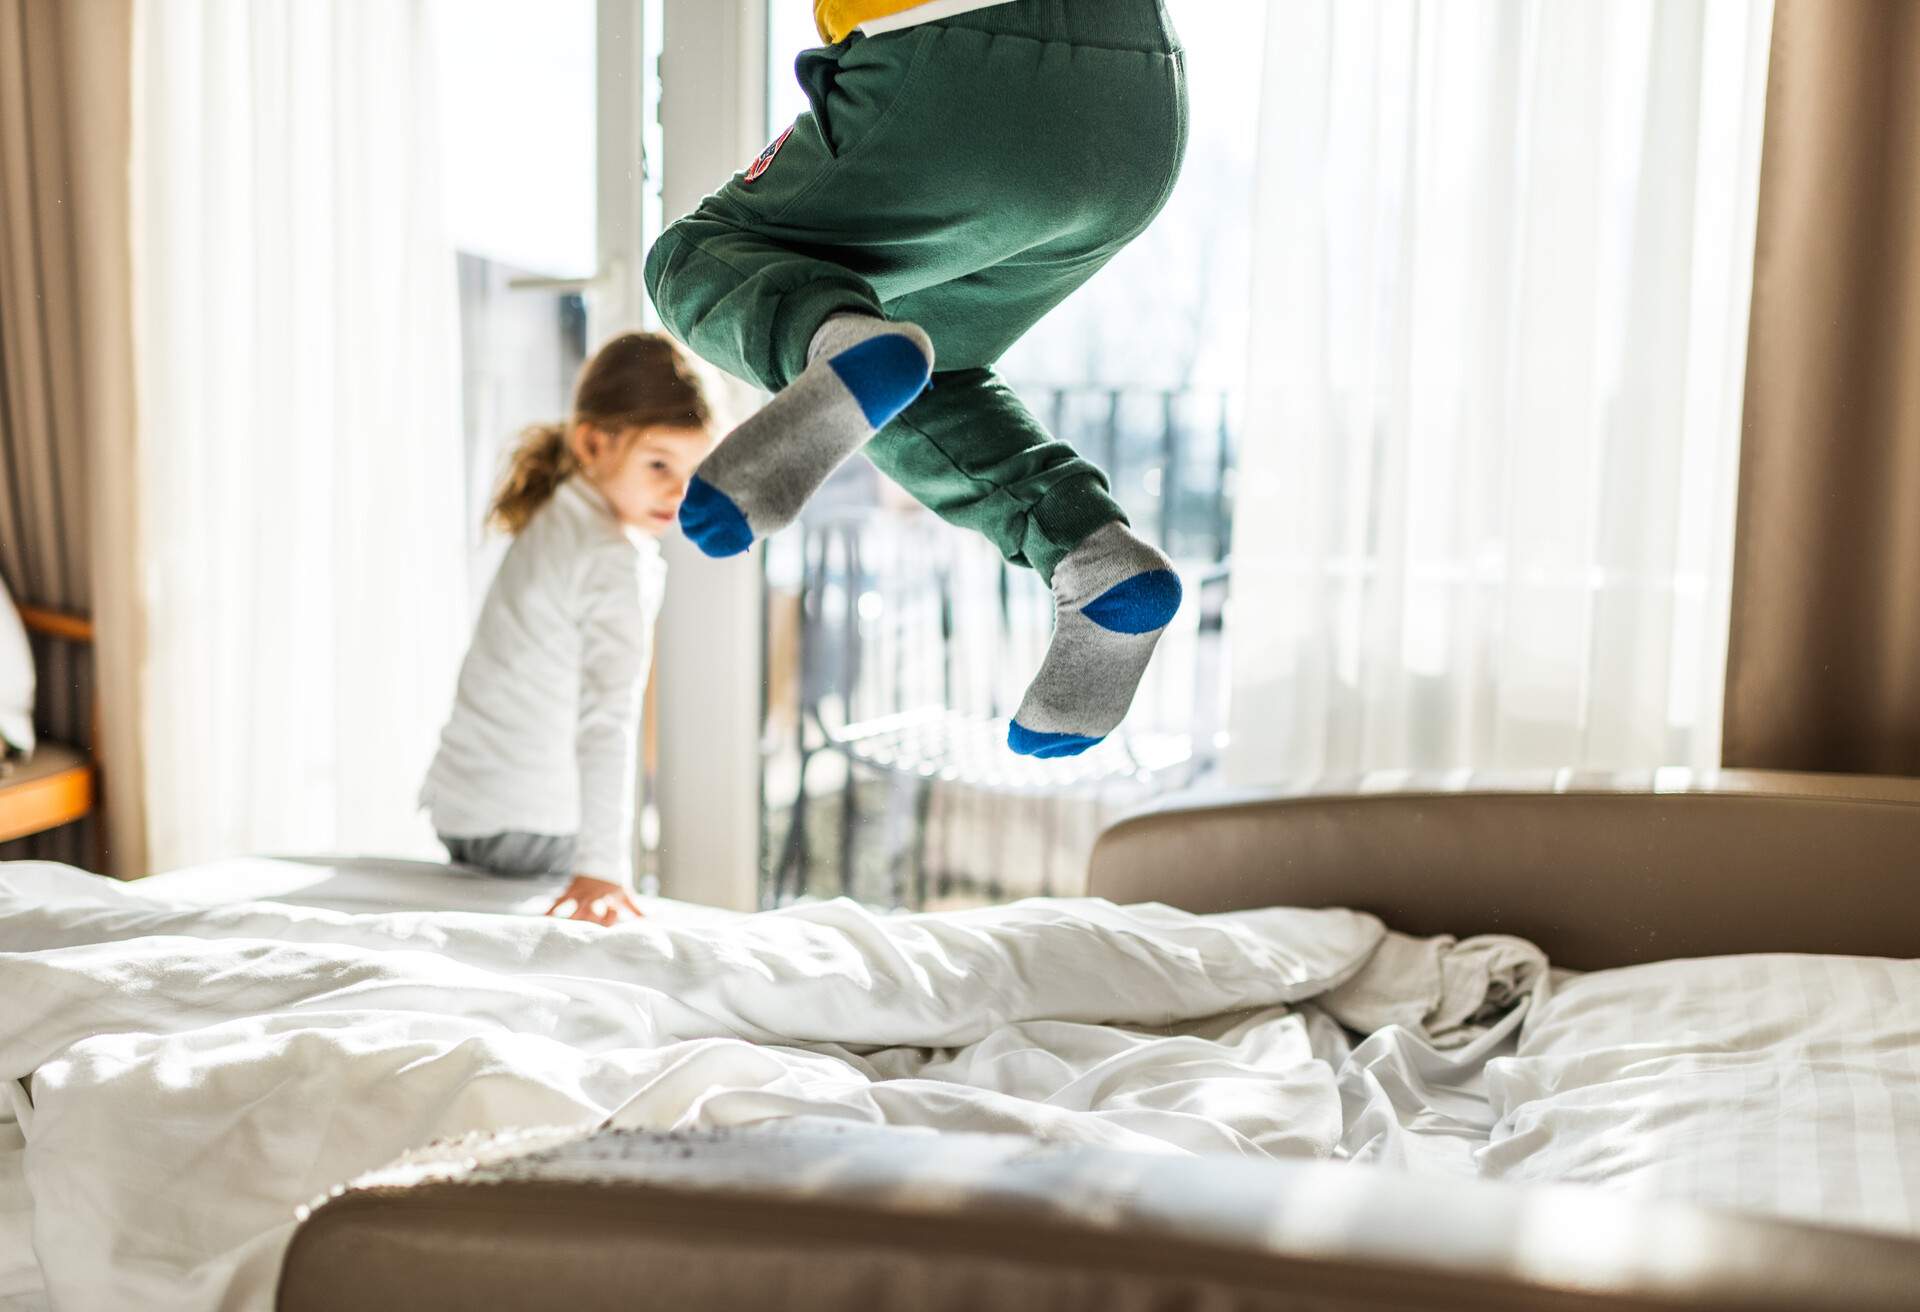 A young child with socks on jumping on the bed.